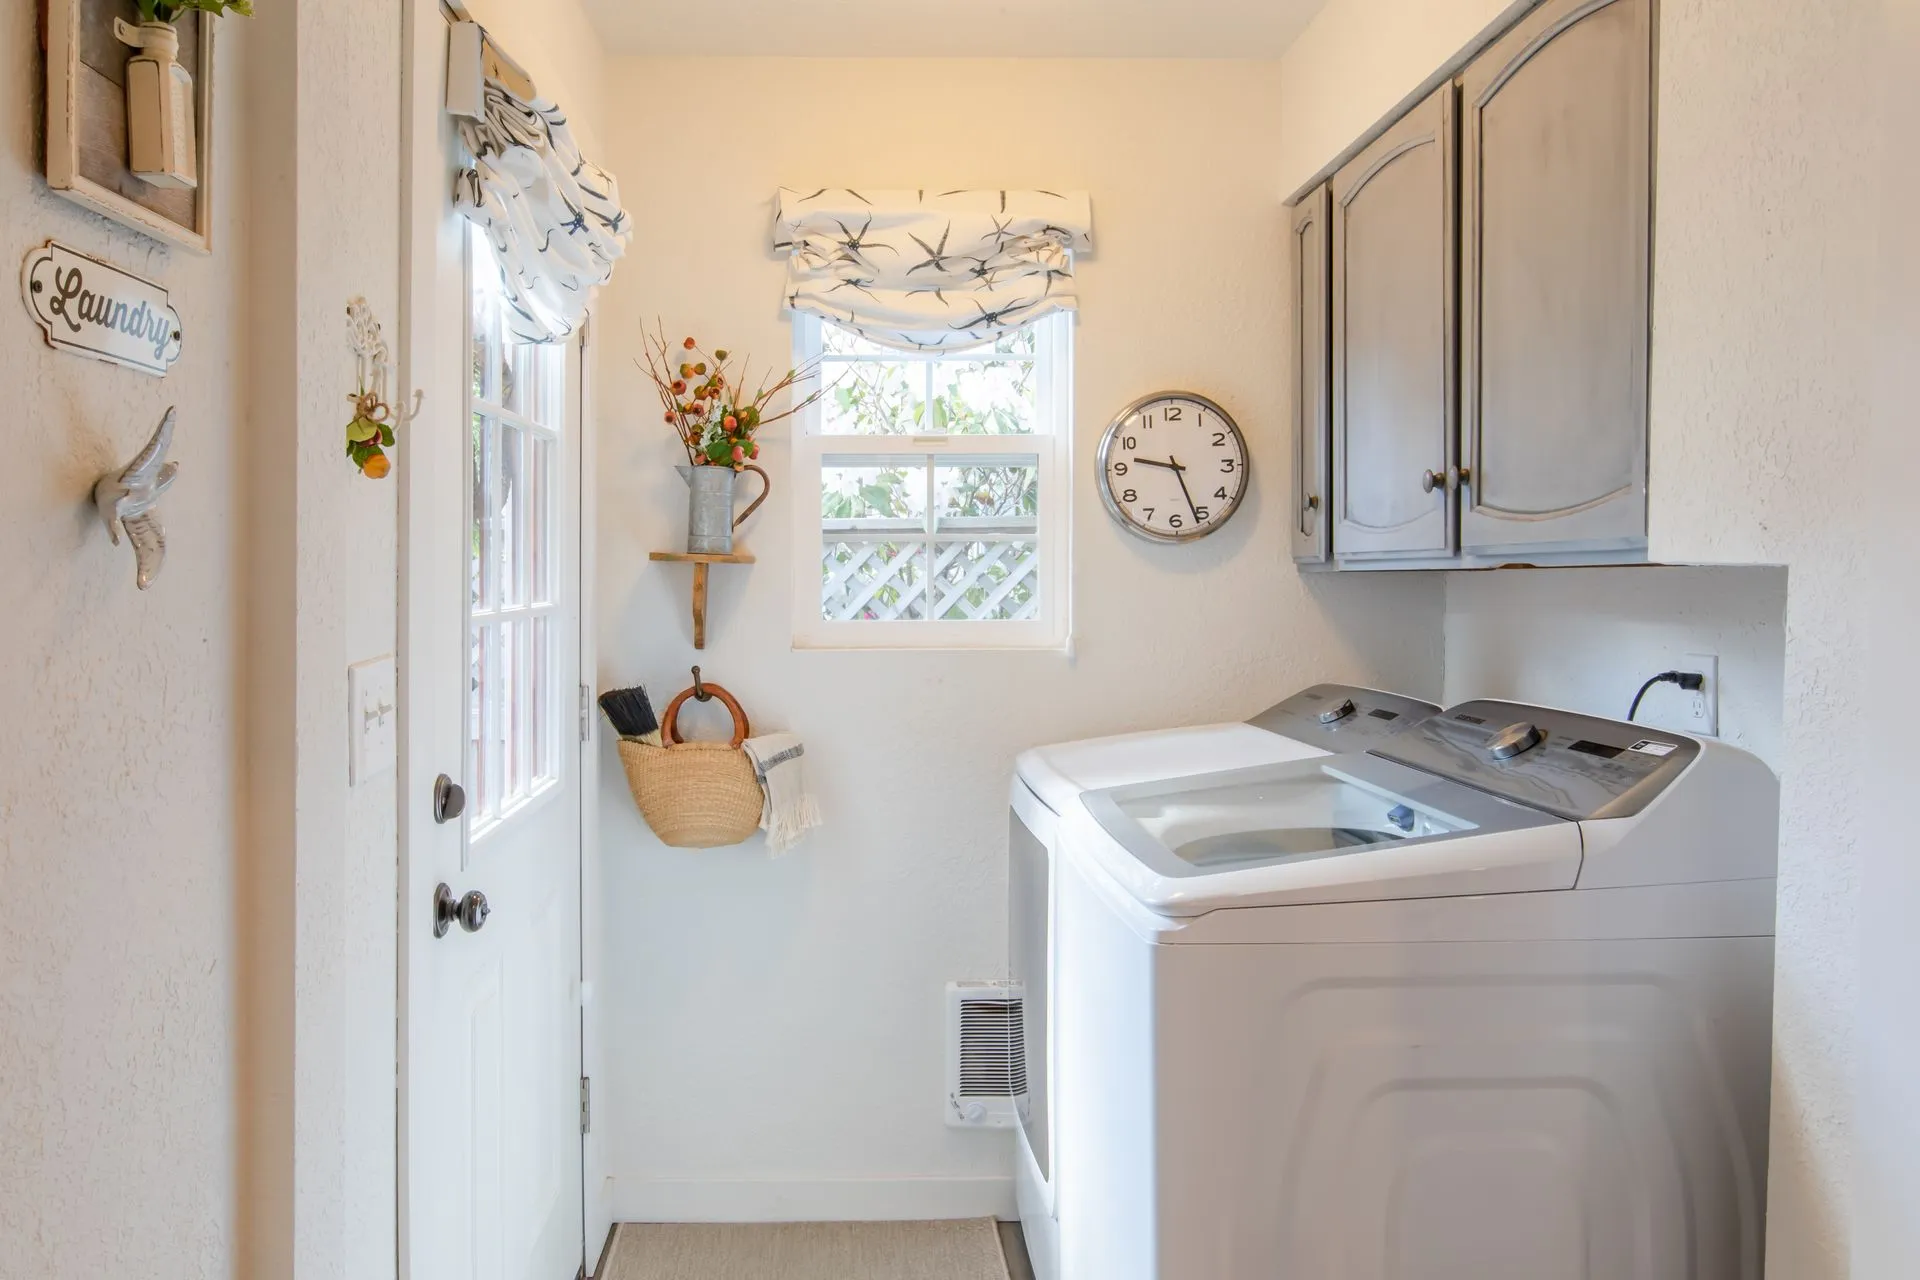 Vacation Rental in Cannon Beach, Red Door Cottage washer and dryer